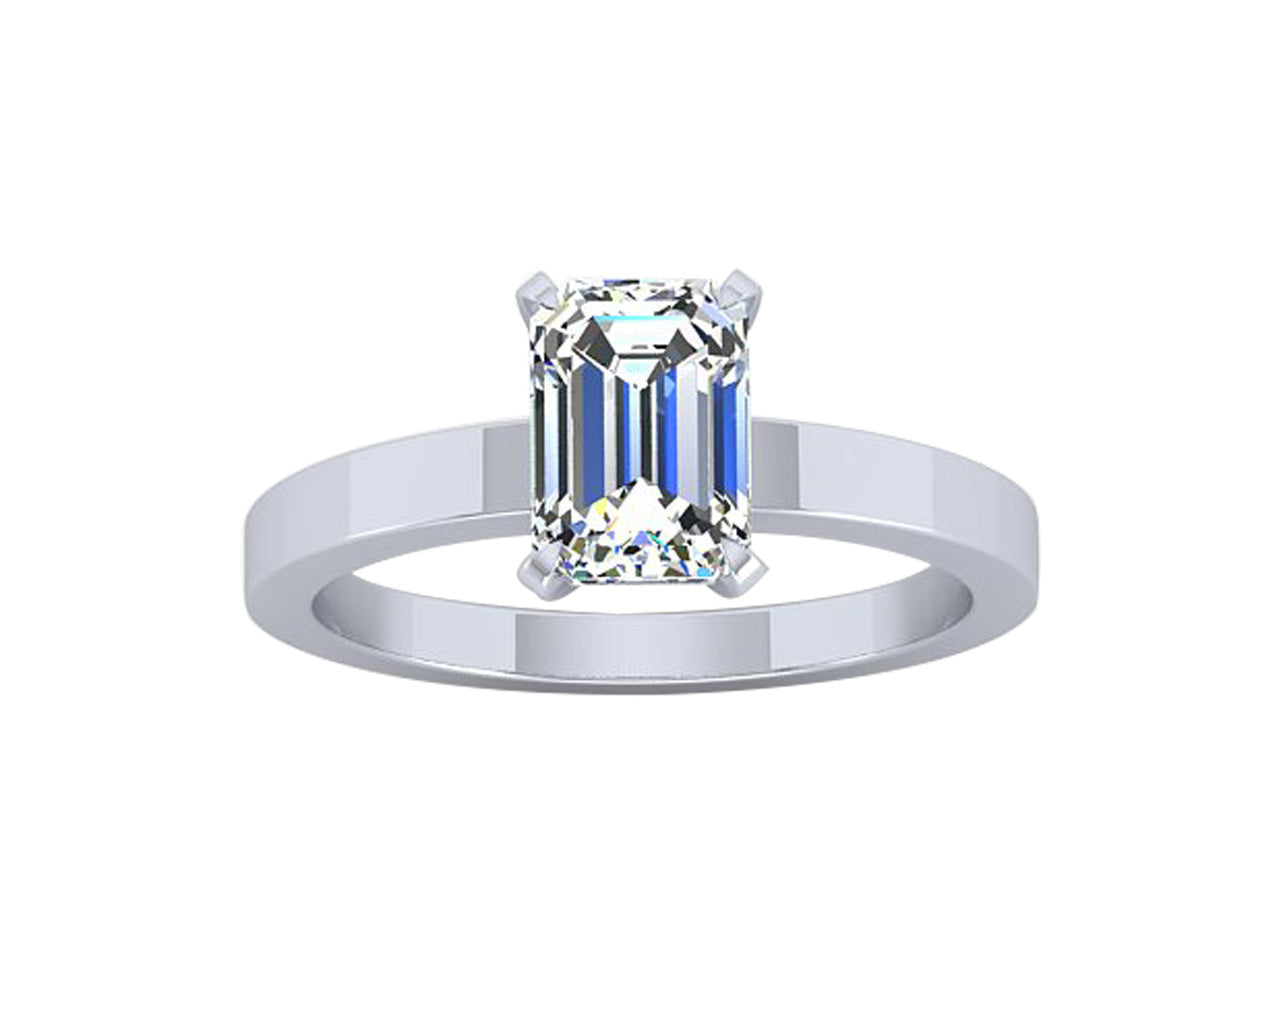 CLASSIC EMERALD CUT FOUR PRONG SOLITAIRE